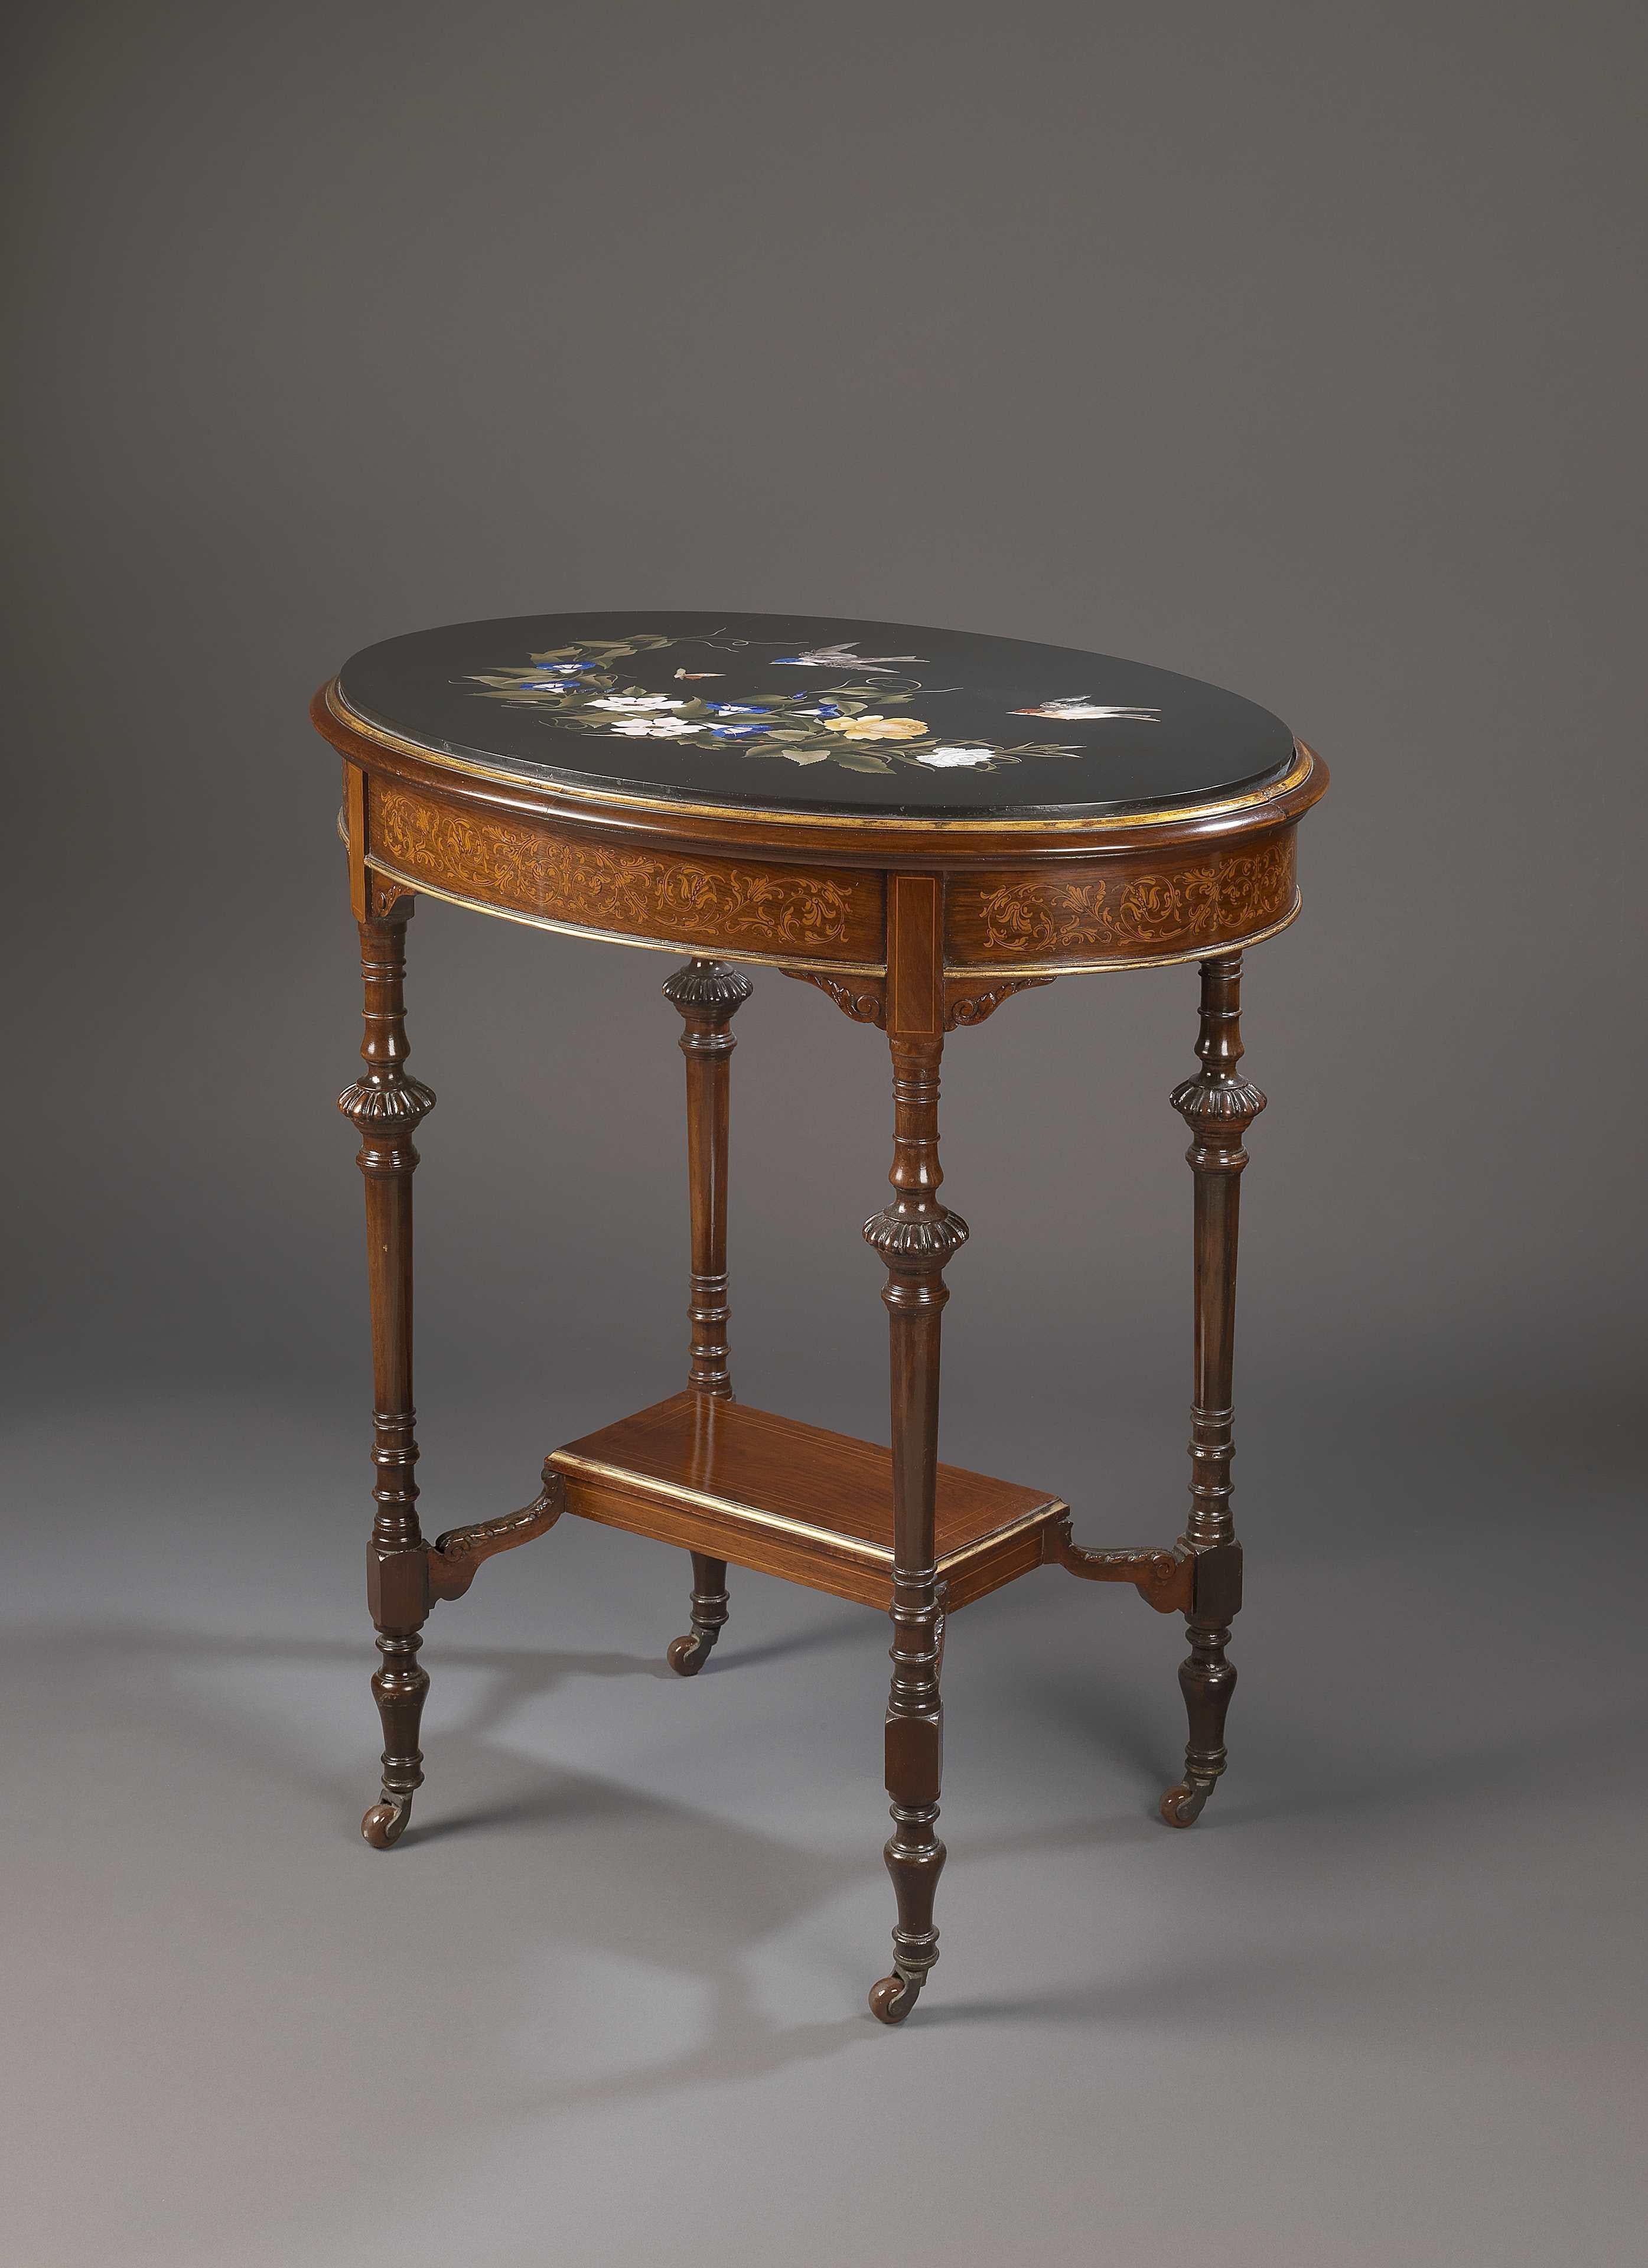 A Victorian marquetry inlaid oval table with an inlaid Ashford marble top, attributed to Collinson and Lock.

English, circa 1880.

The firm of Collinson & Lock was established in London in the third quarter of the Nineteenth century with the